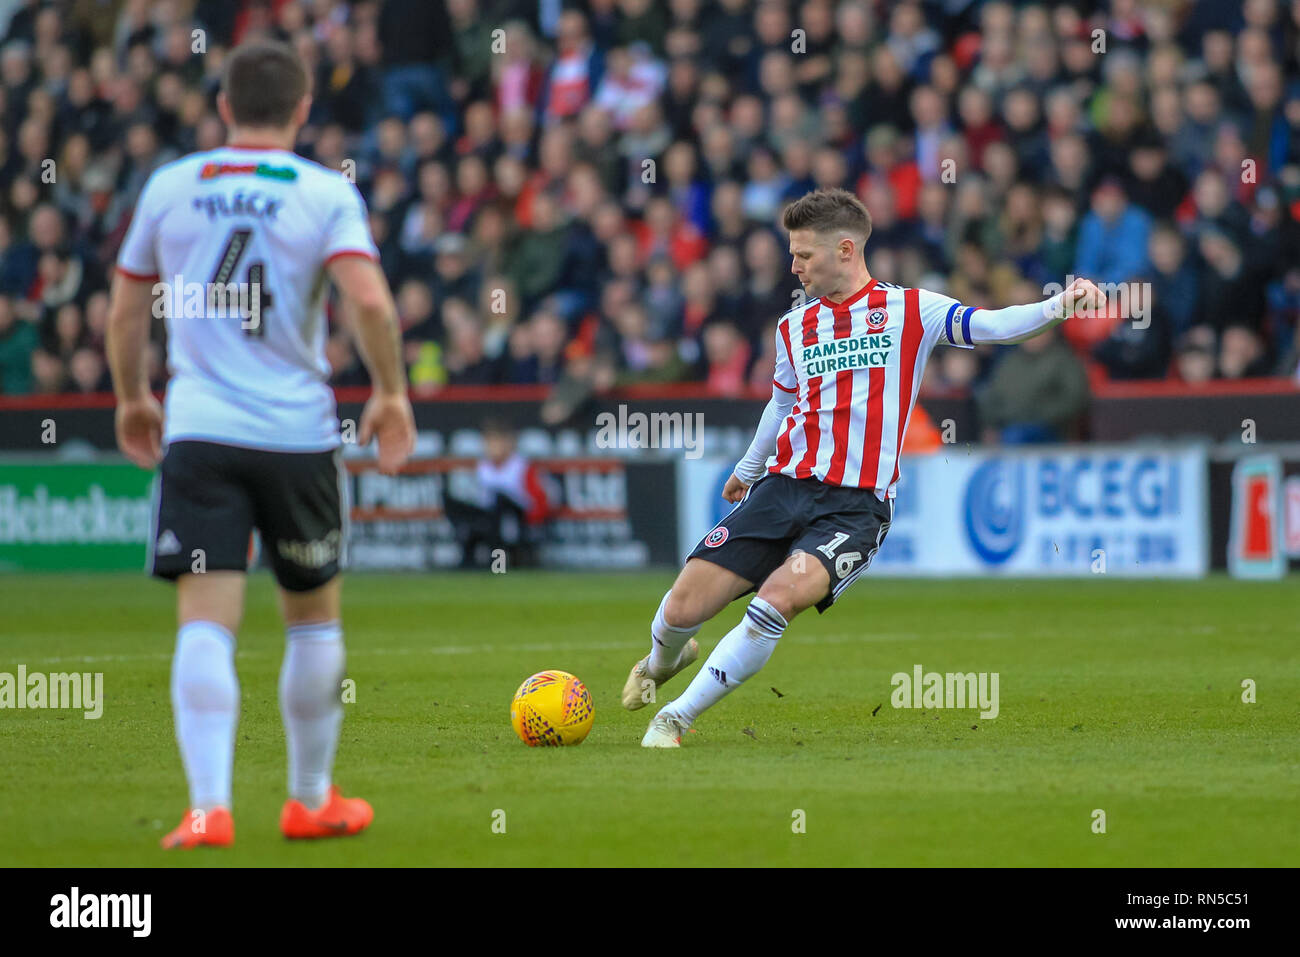 16th February 2019, Bramall Lane, Sheffield, England; Sky Bet Championship, Sheffield United vs Reading ;  Oliver Norwood (16) of Sheffield United  crosses the ball  Credit: Craig Milner/News Images  English Football League images are subject to DataCo Licence Stock Photo